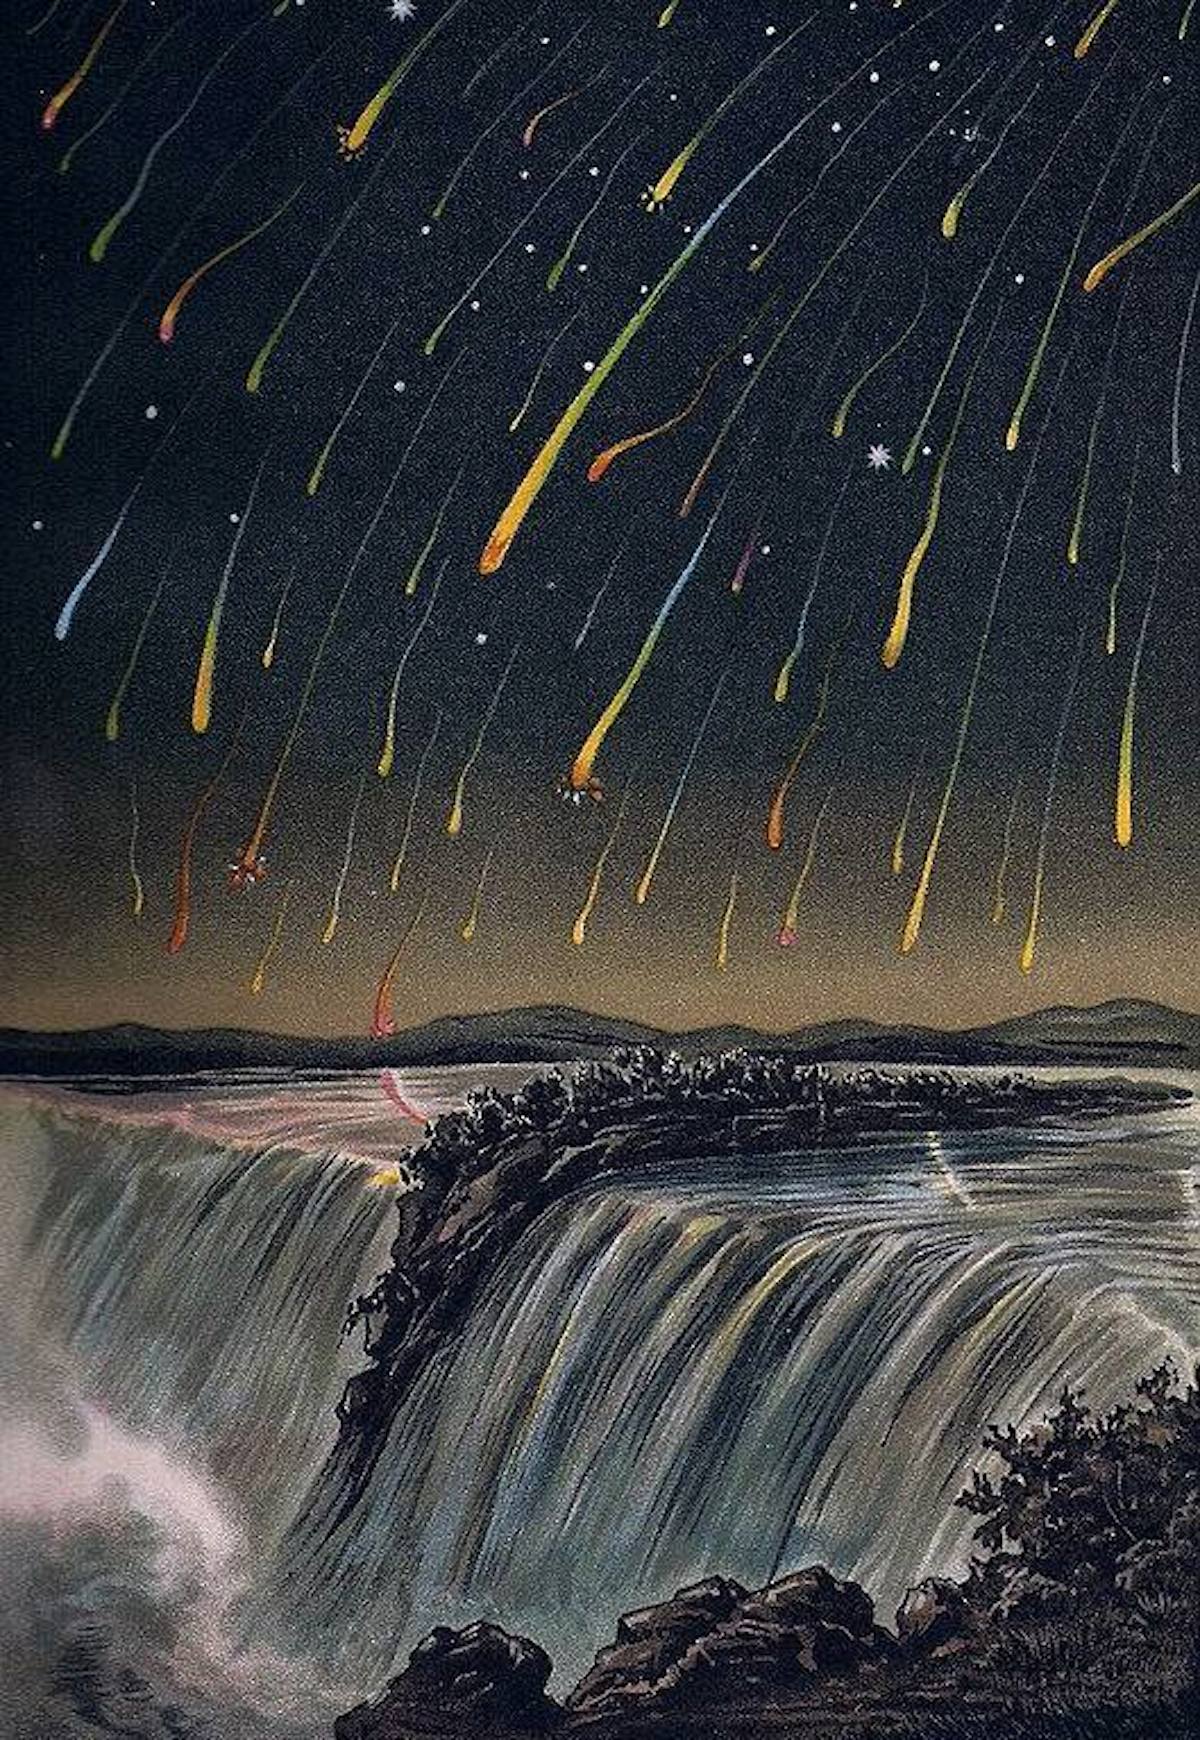 advent 6 Leonid Meteor Storm, as seen over North America on the night of November 12-13, 1833, from E. Weiß’s 'Bilderatlas der Sternenwelt'